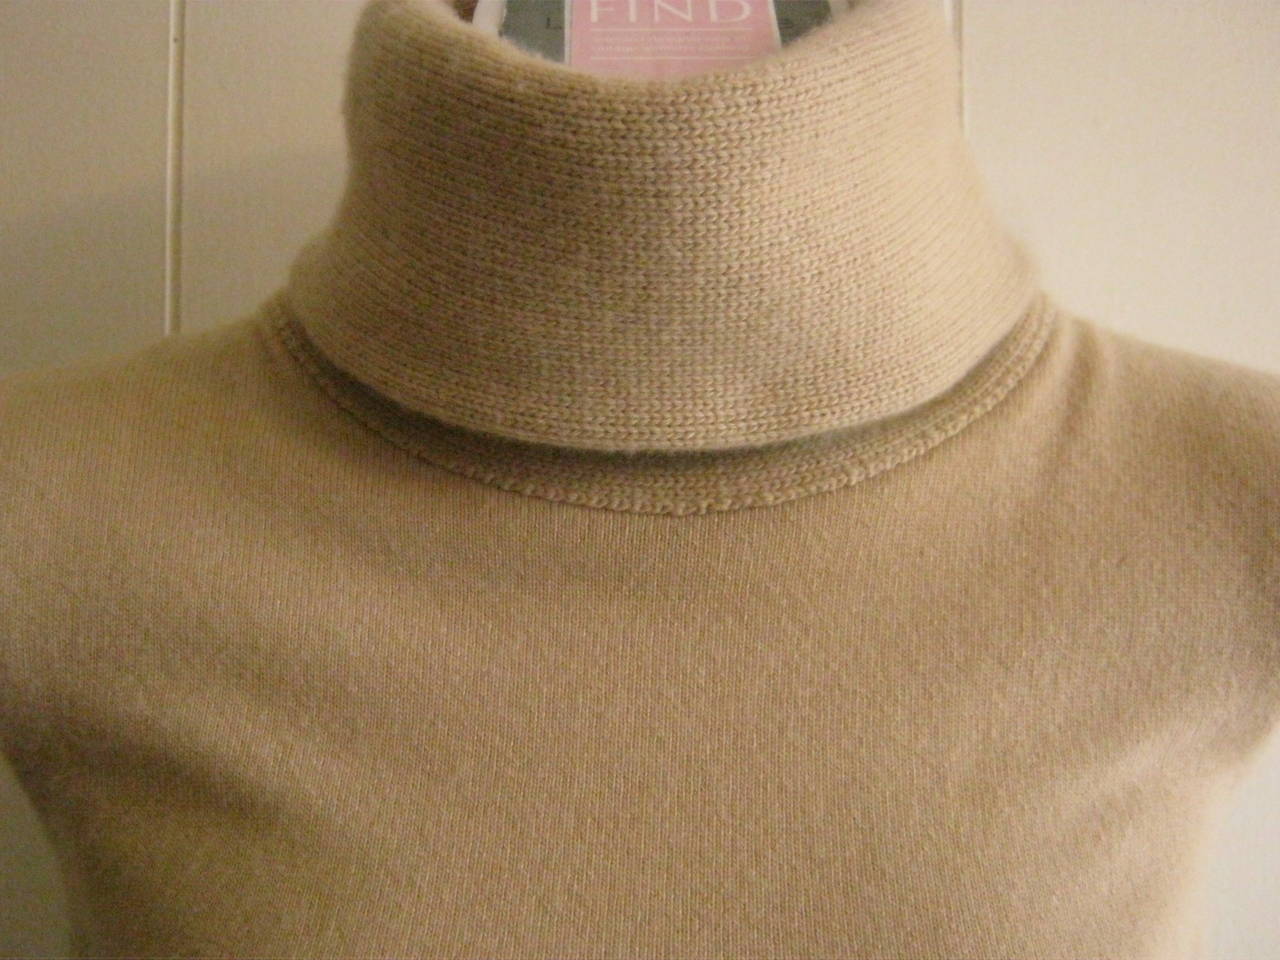 Luxurious cashmere sweater made in Great Britain. In excellent condition, this sweater sports a 9